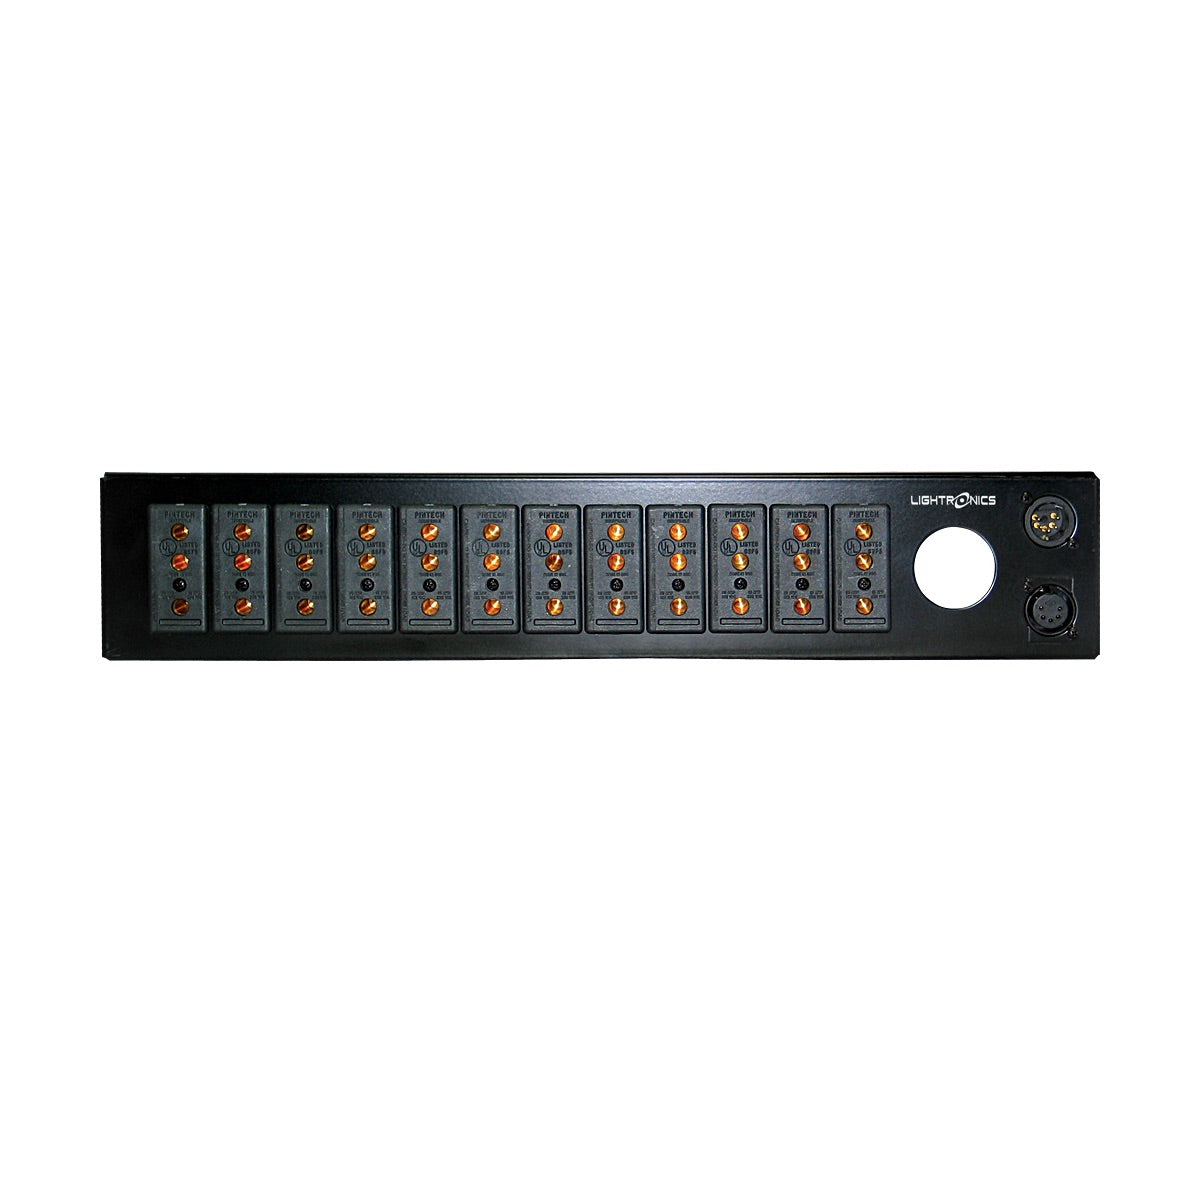 Lightronics RD122 Rack Mount Dimmer, RD Series, rear Stagepin Outlet Panel